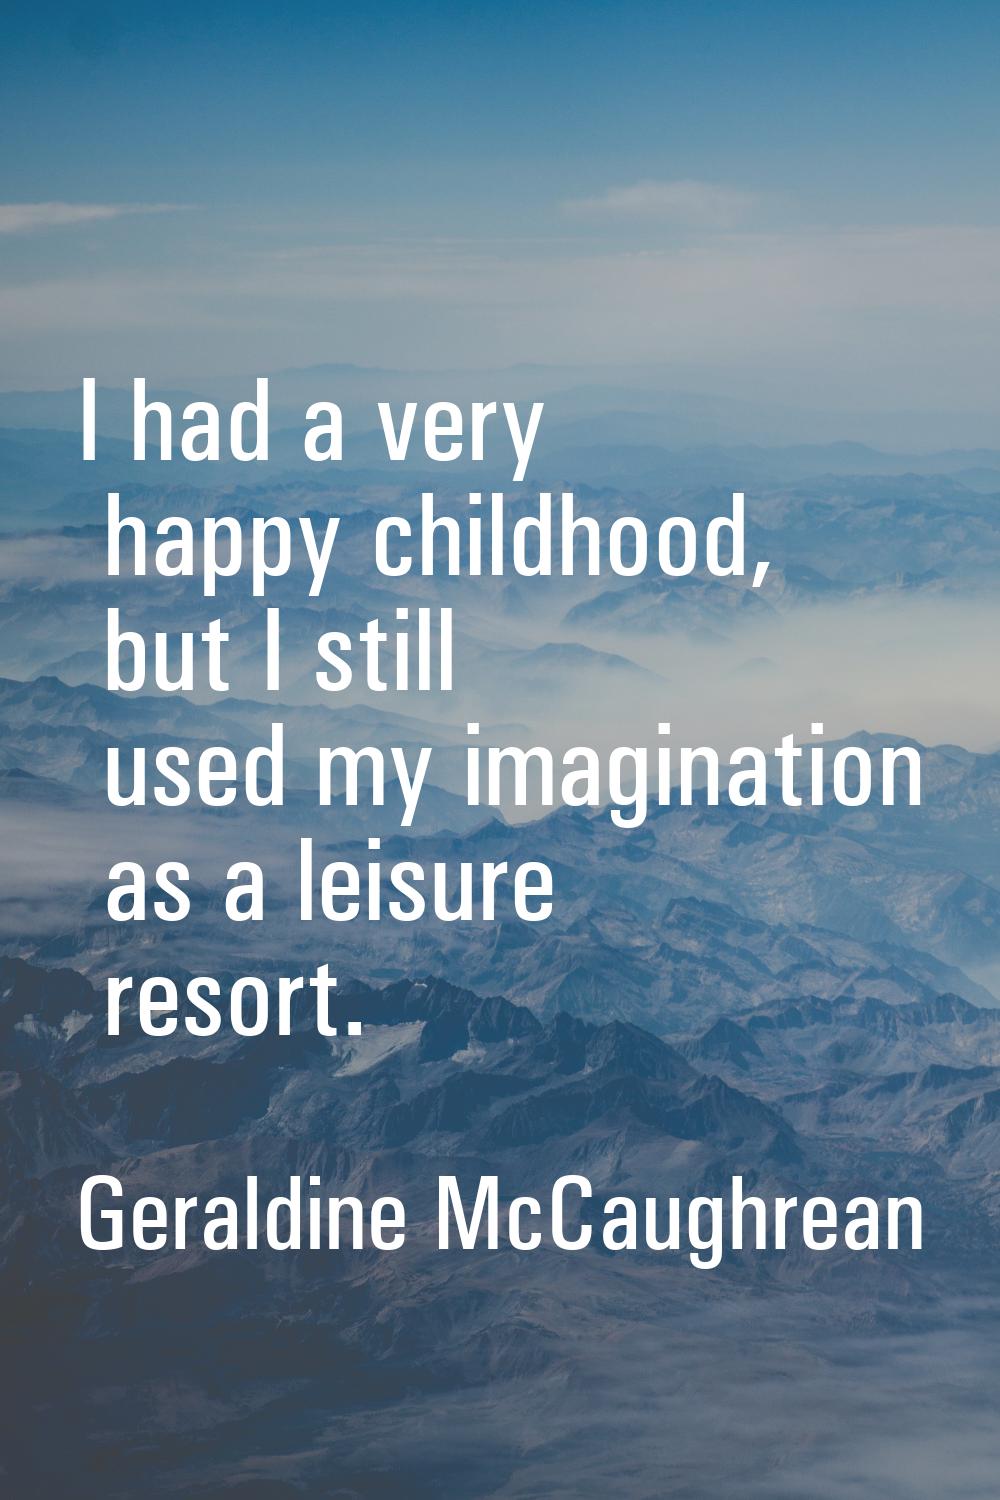 I had a very happy childhood, but I still used my imagination as a leisure resort.